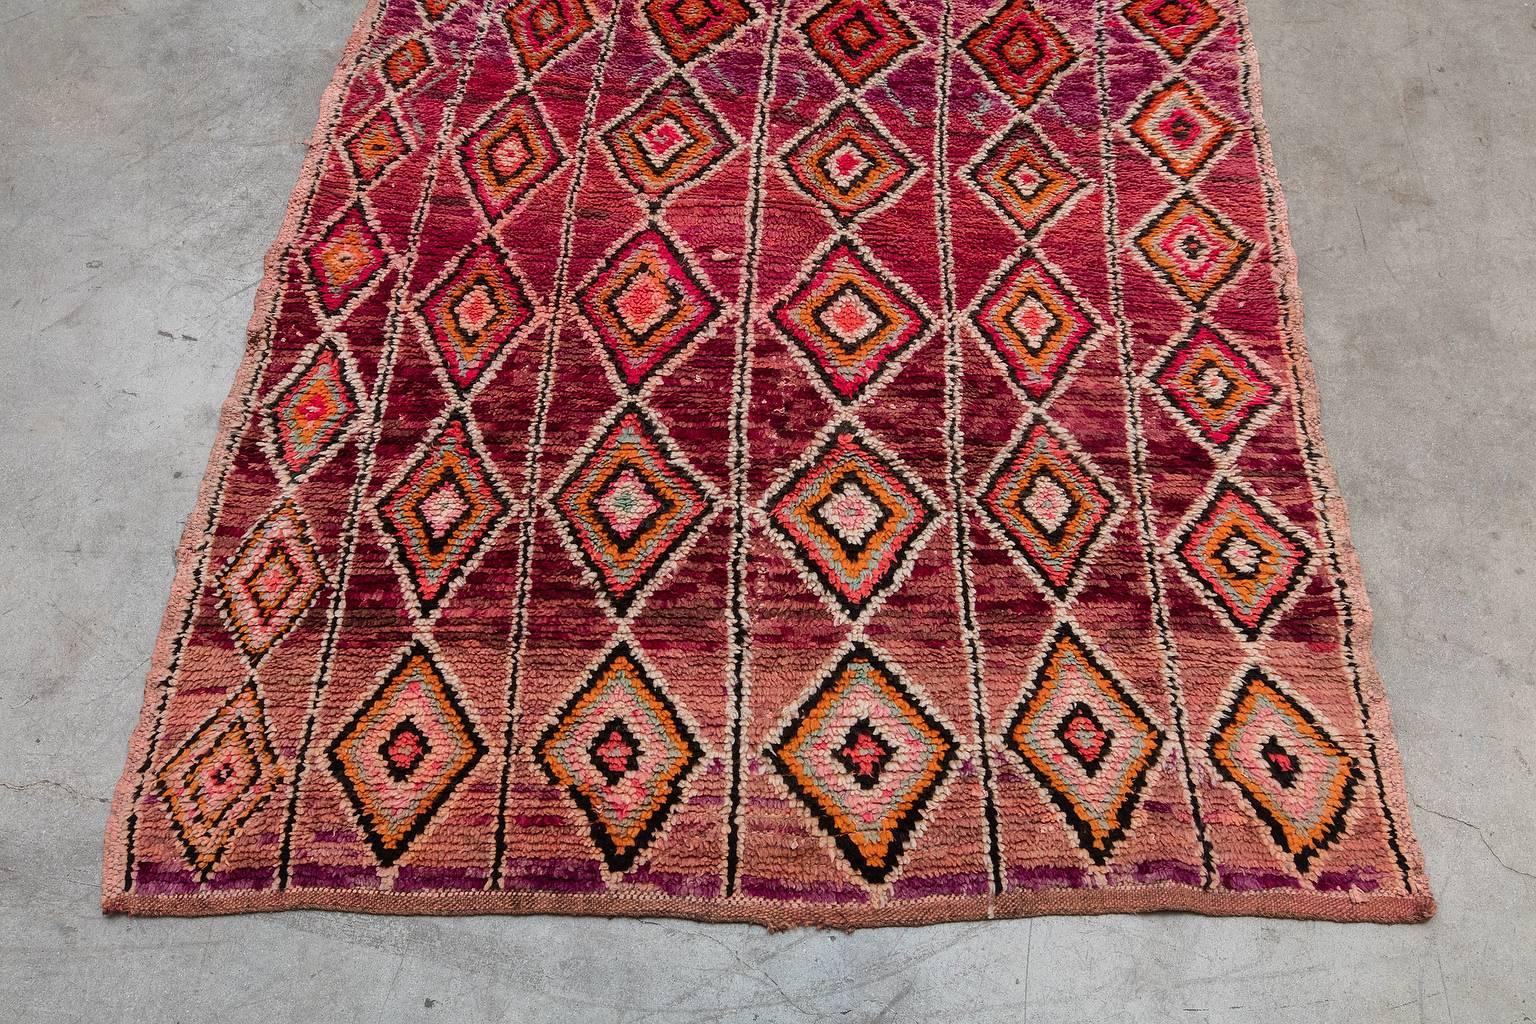 Originating from Khouribga in the Middle Atlas region of Morocco, Boujad rugs are low-pile and known for their abstract and geometric shapes. These artistic pieces are typically abundant in red, orange, pink and mauve colors.

Measurement does not